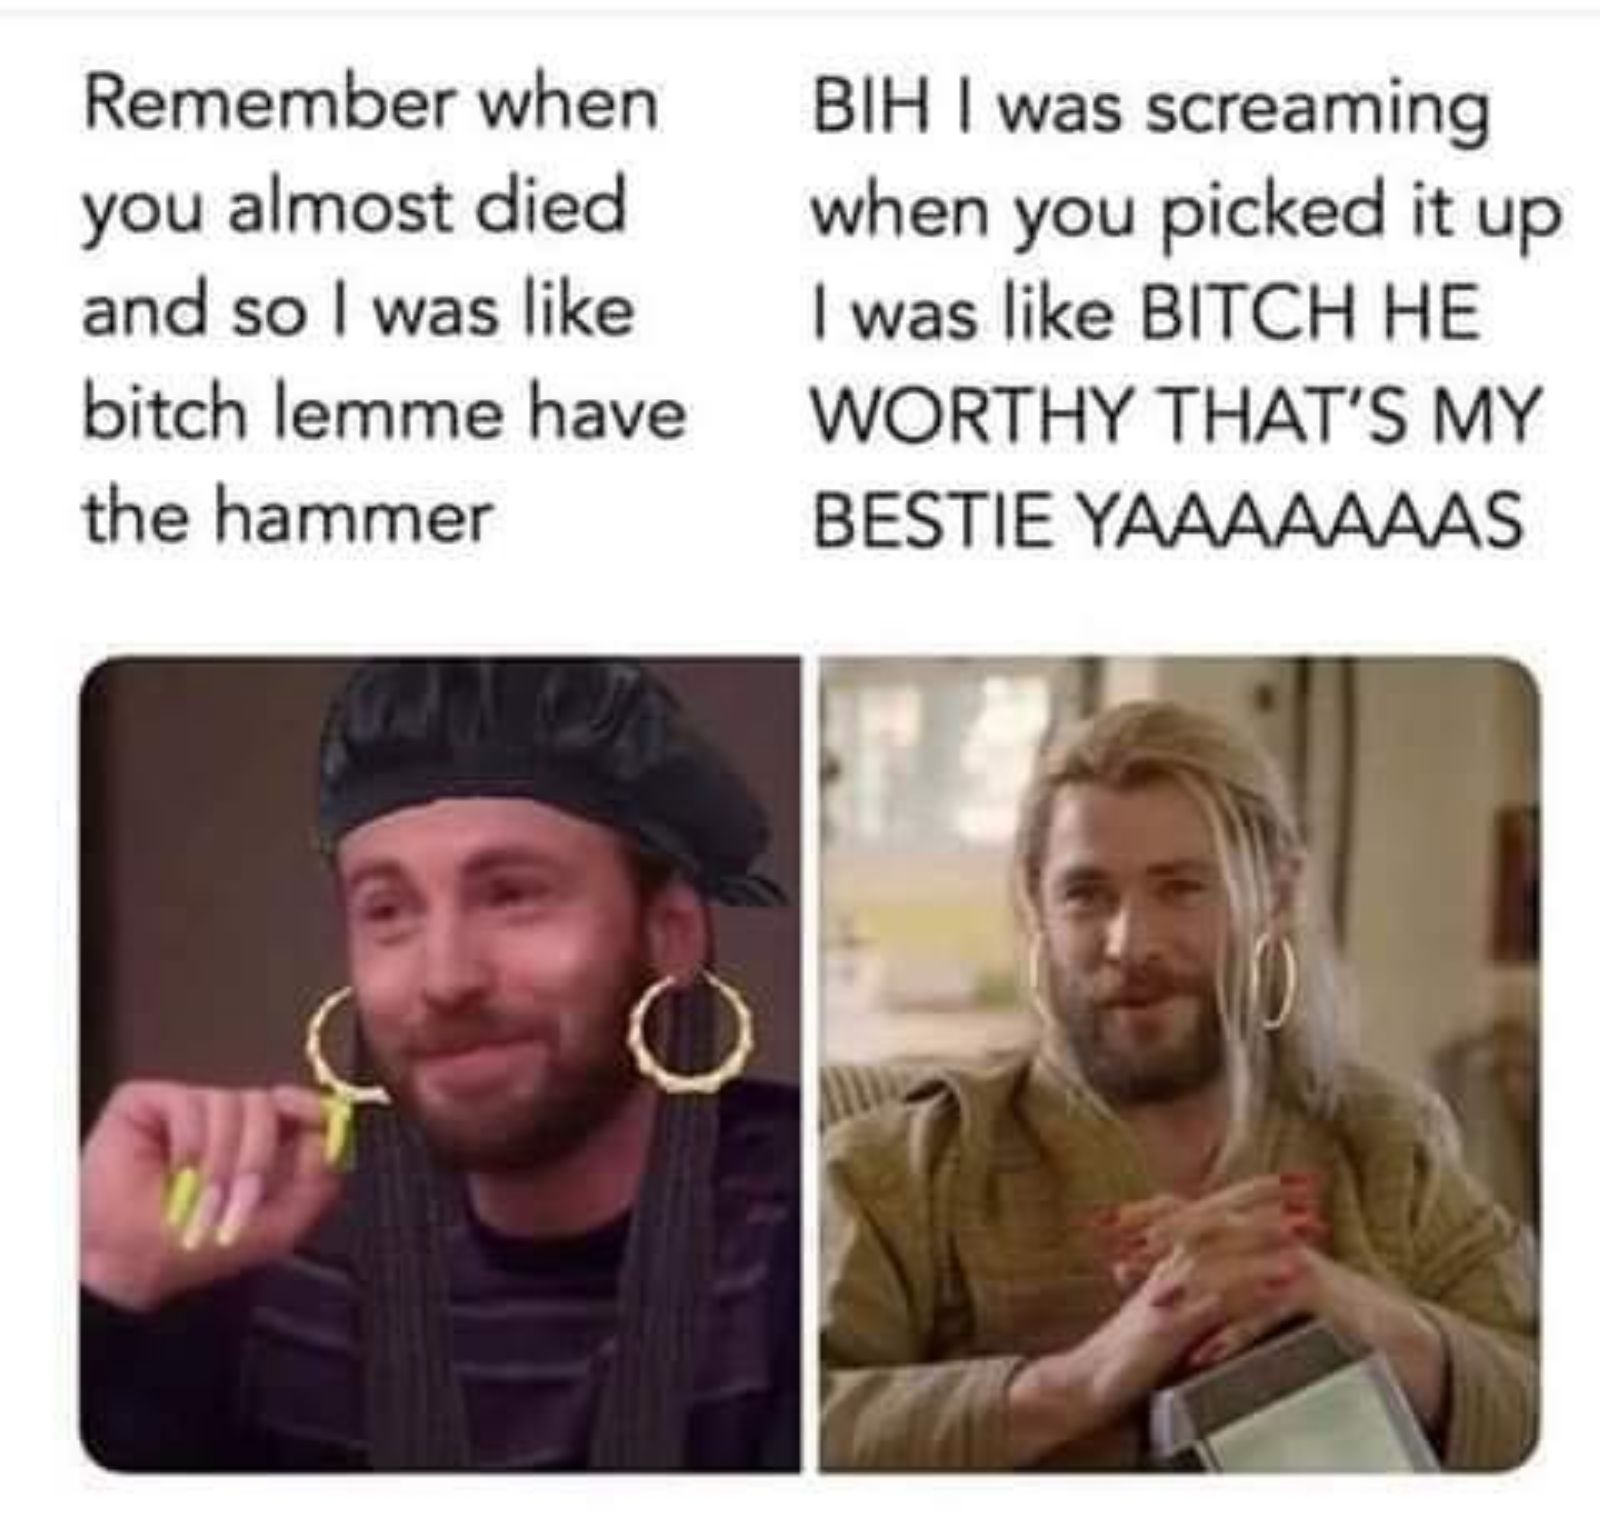 captain america thor nails meme - Remember when you almost died and so I was bitch lemme have the hammer Bih I was screaming when you picked it up I was Bitch He Worthy That'S My Bestie Yaaaaaaas